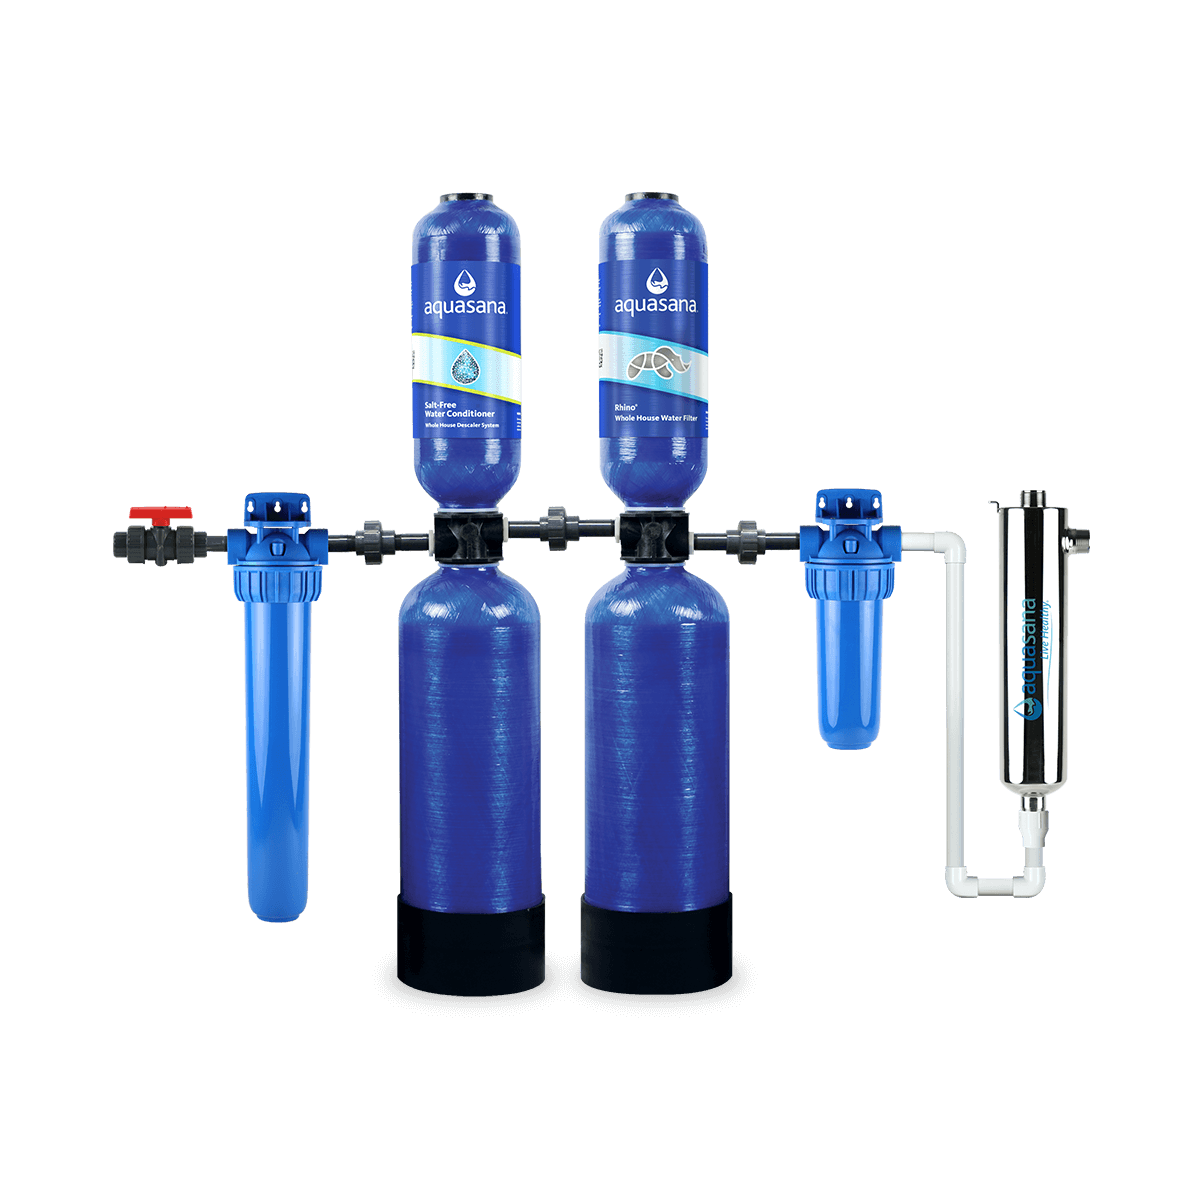 Aquasana water filter systems for the whole house